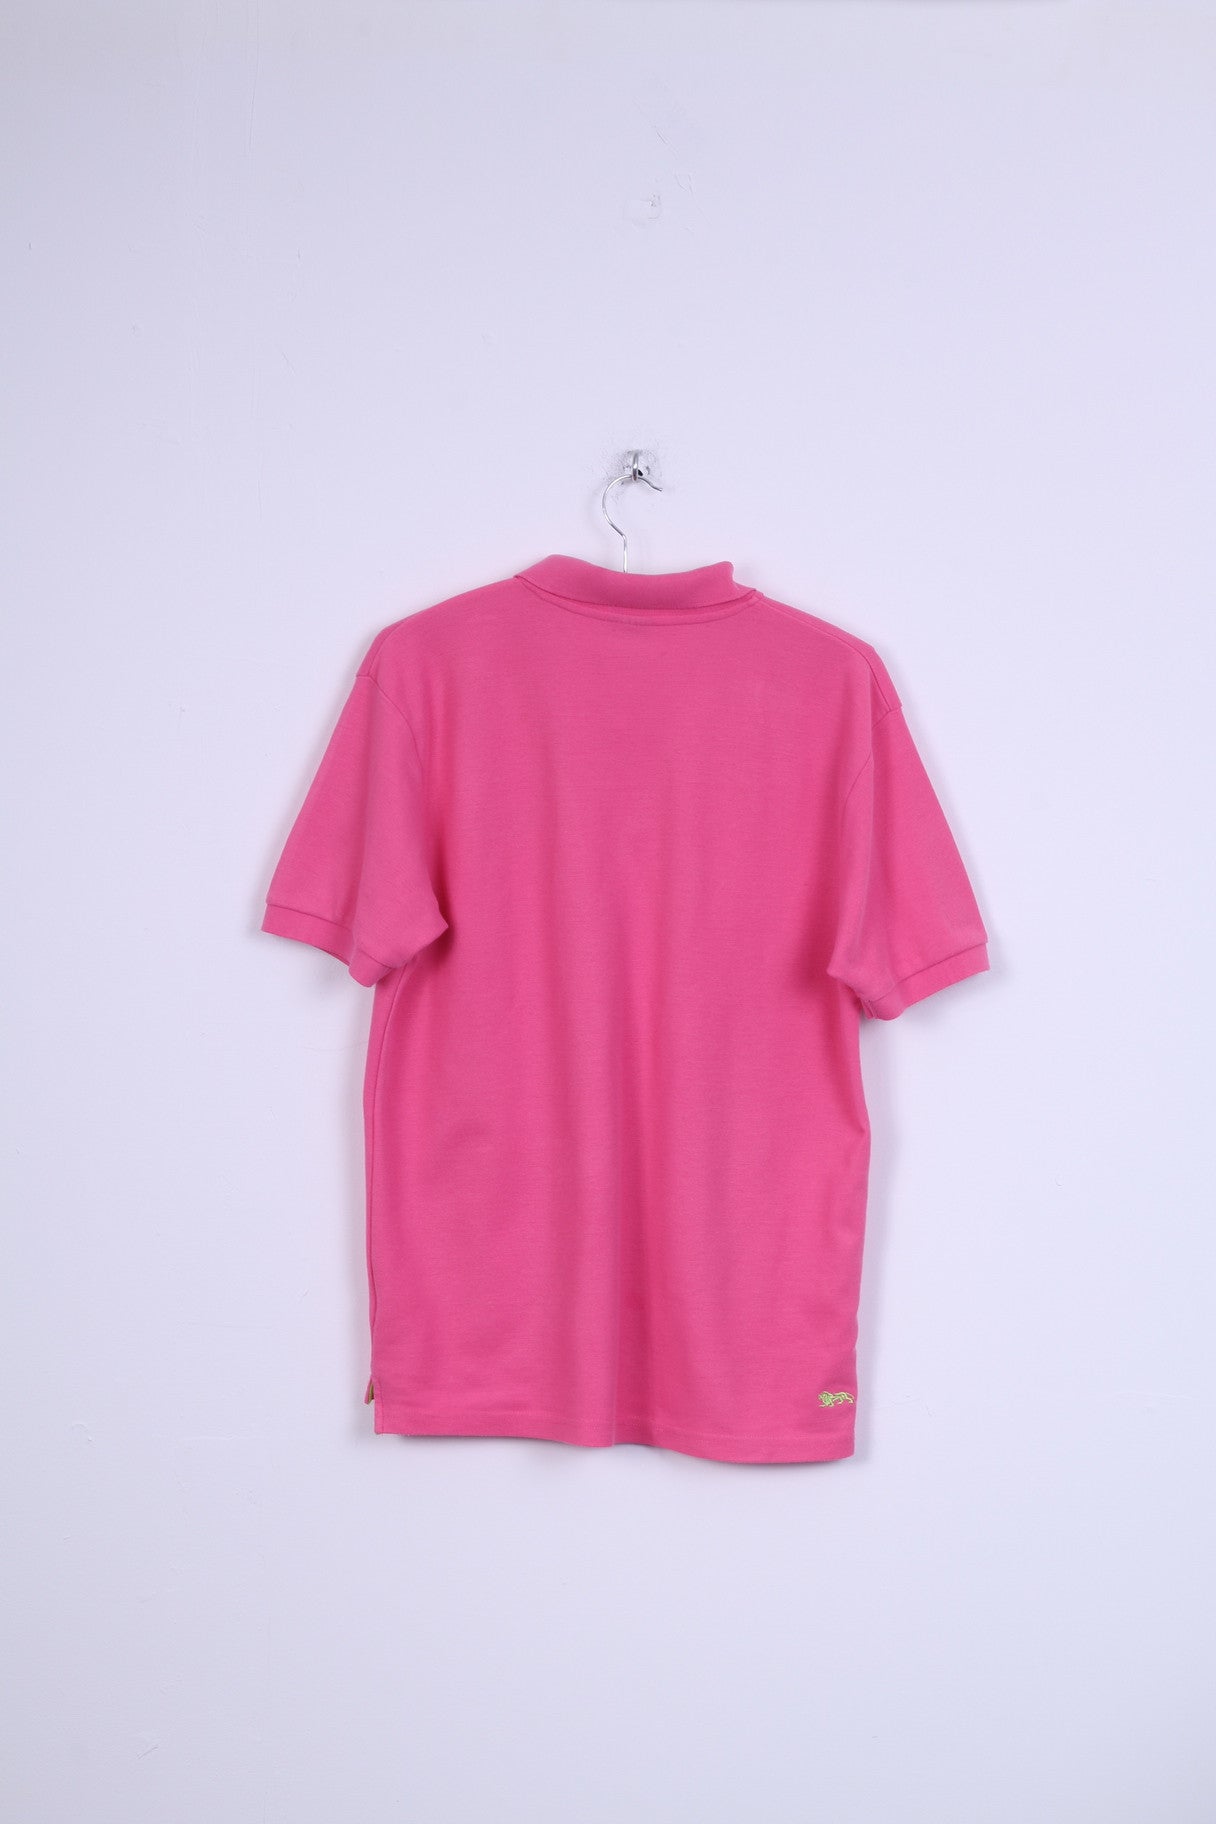 Lonsdale London Mens S Polo Shirt Pink Neon Cotton Short Sleeve Top